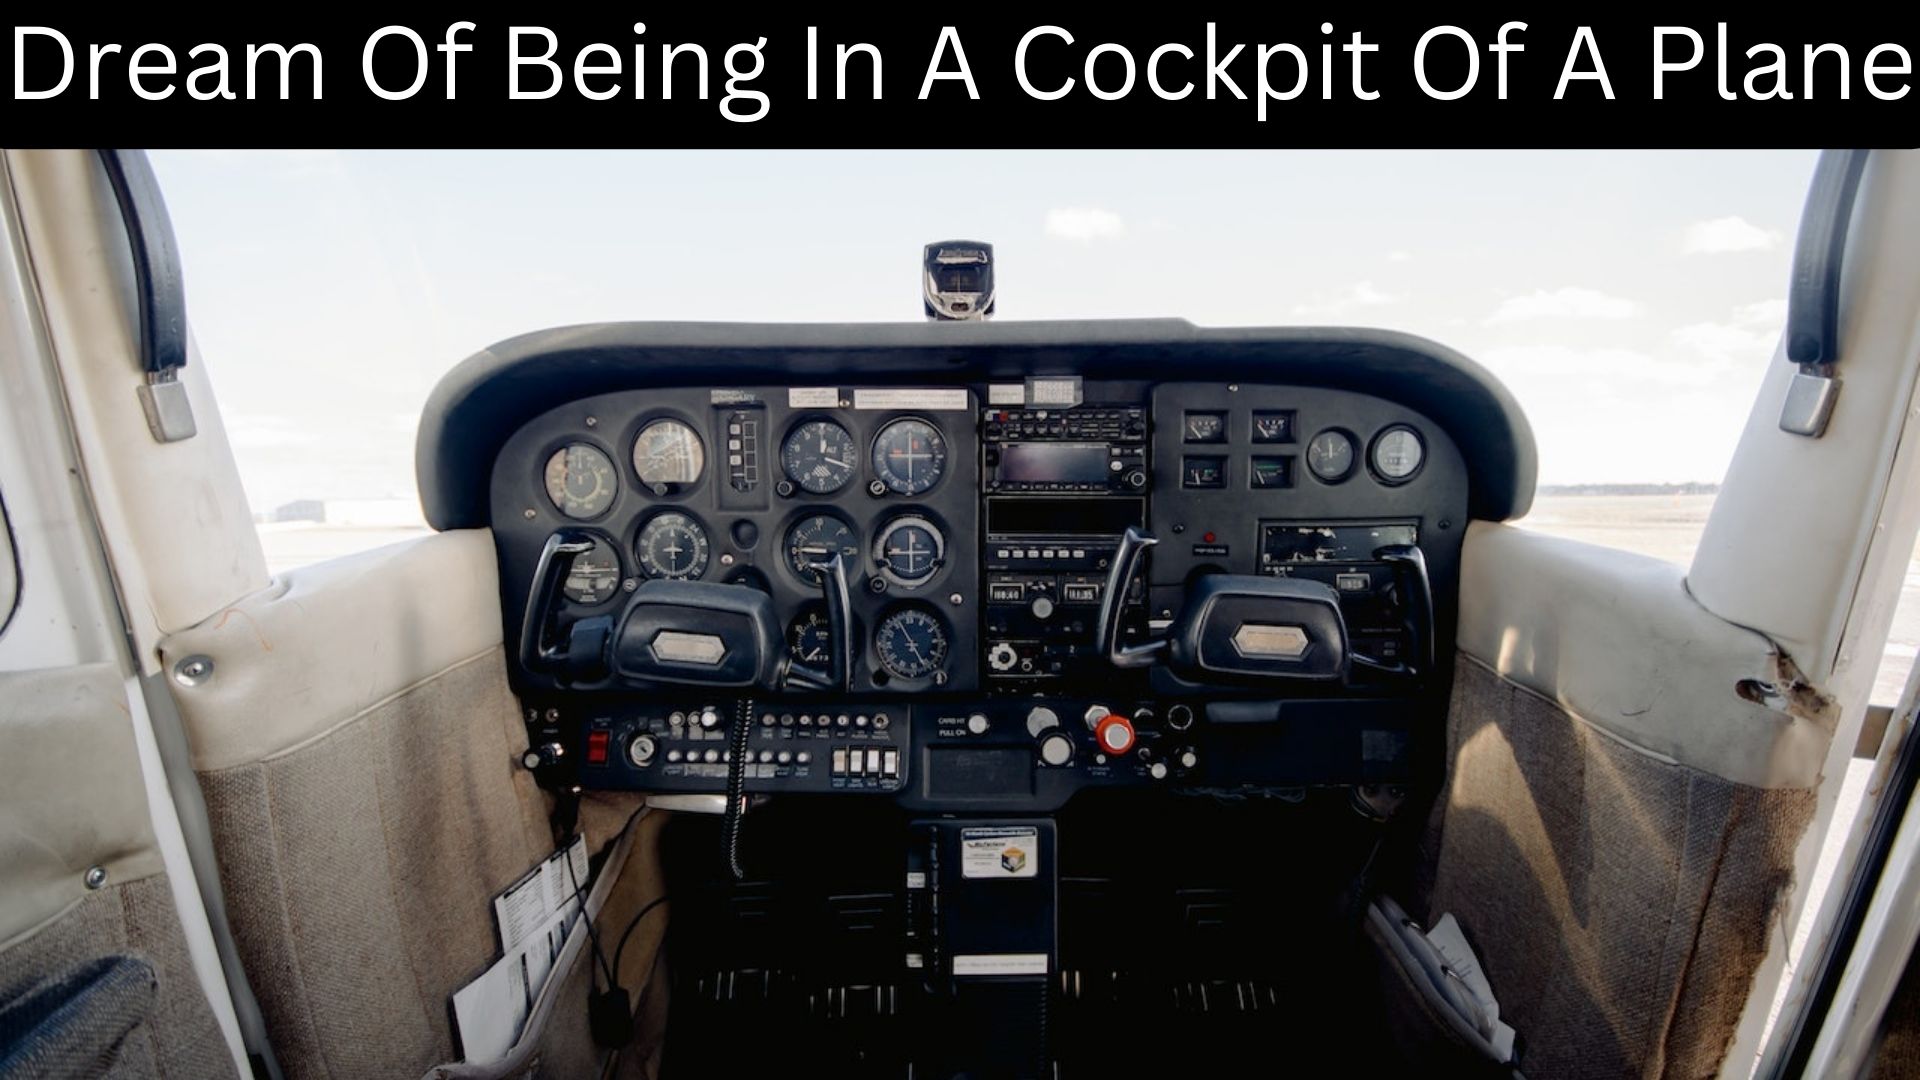 Dream Of Being In A Cockpit Of A Plane - Interpretation And Meaning